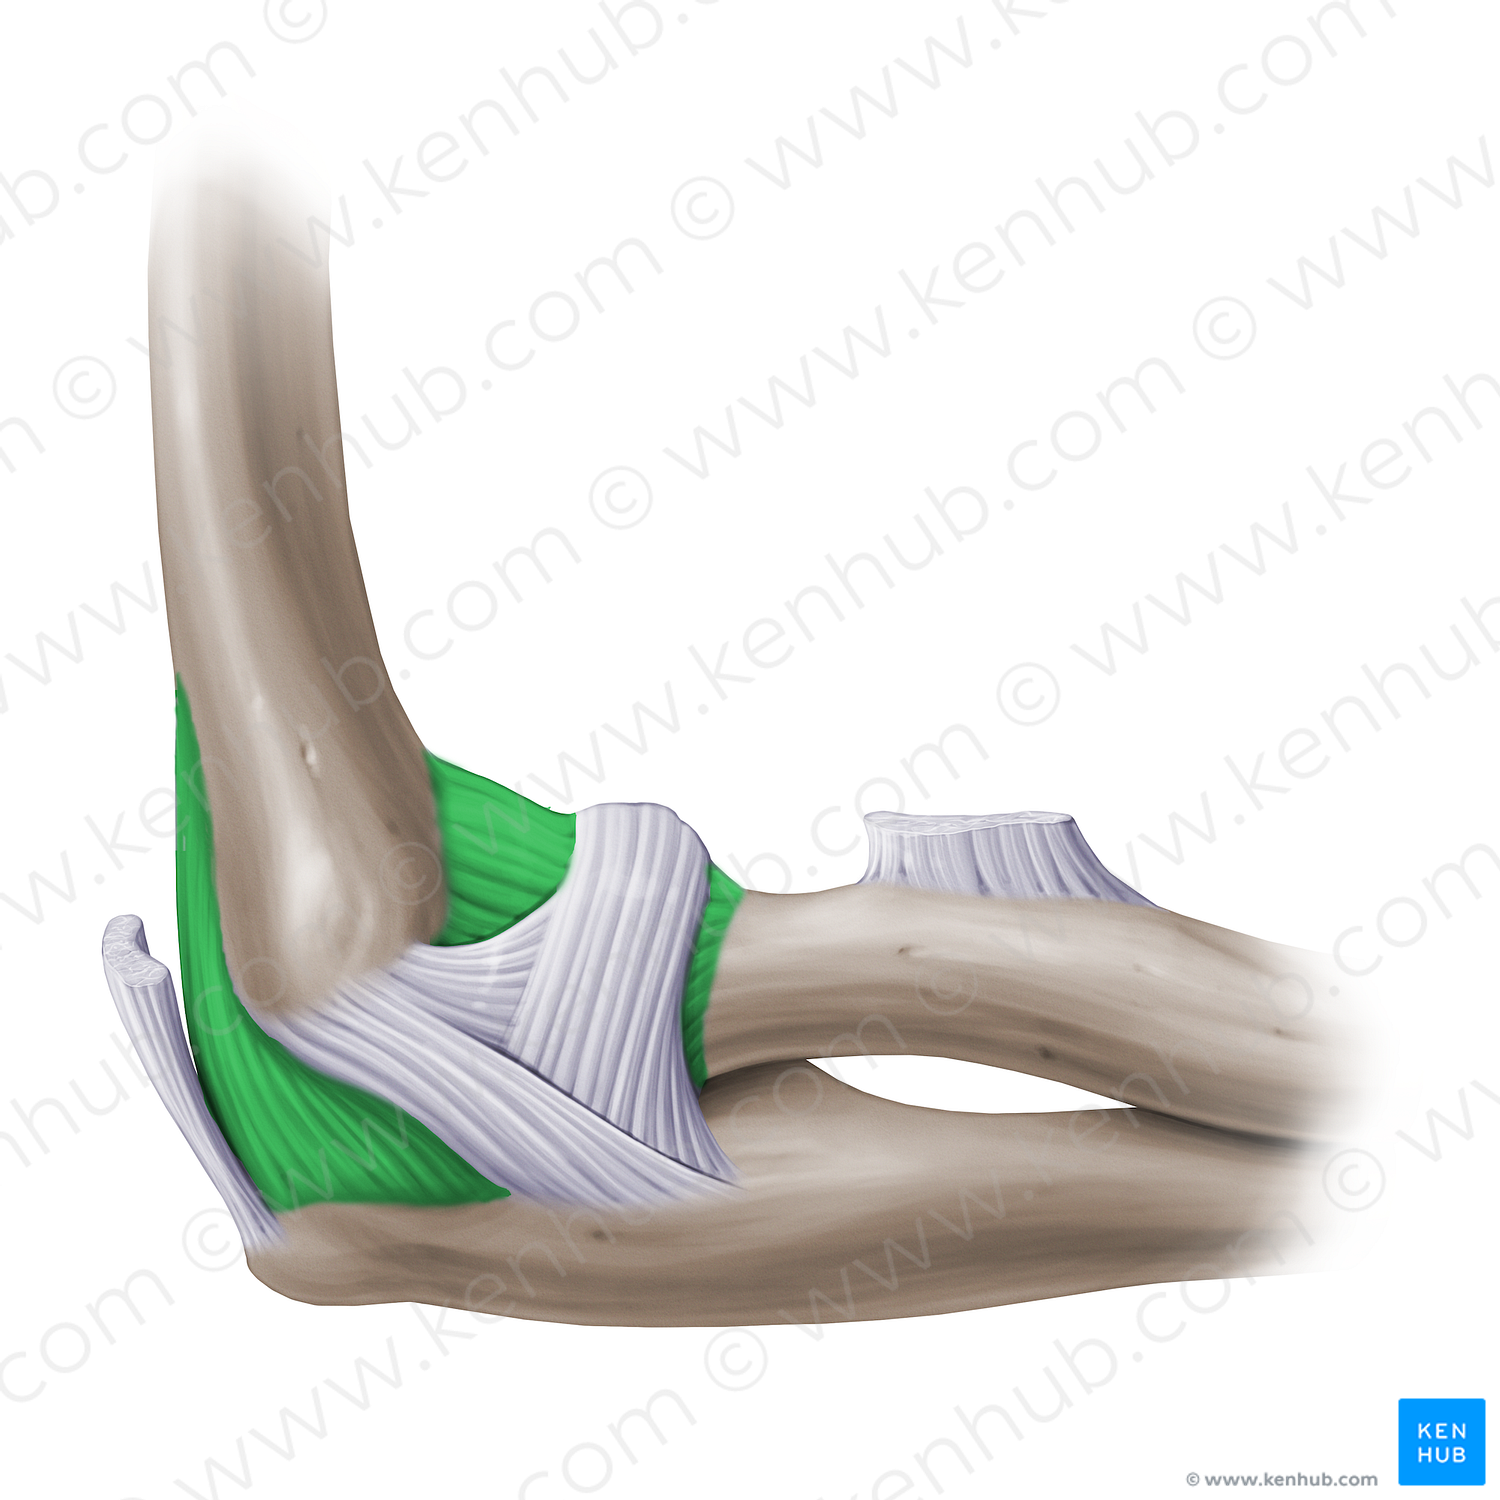 Articular capsule of elbow joint (#14132)